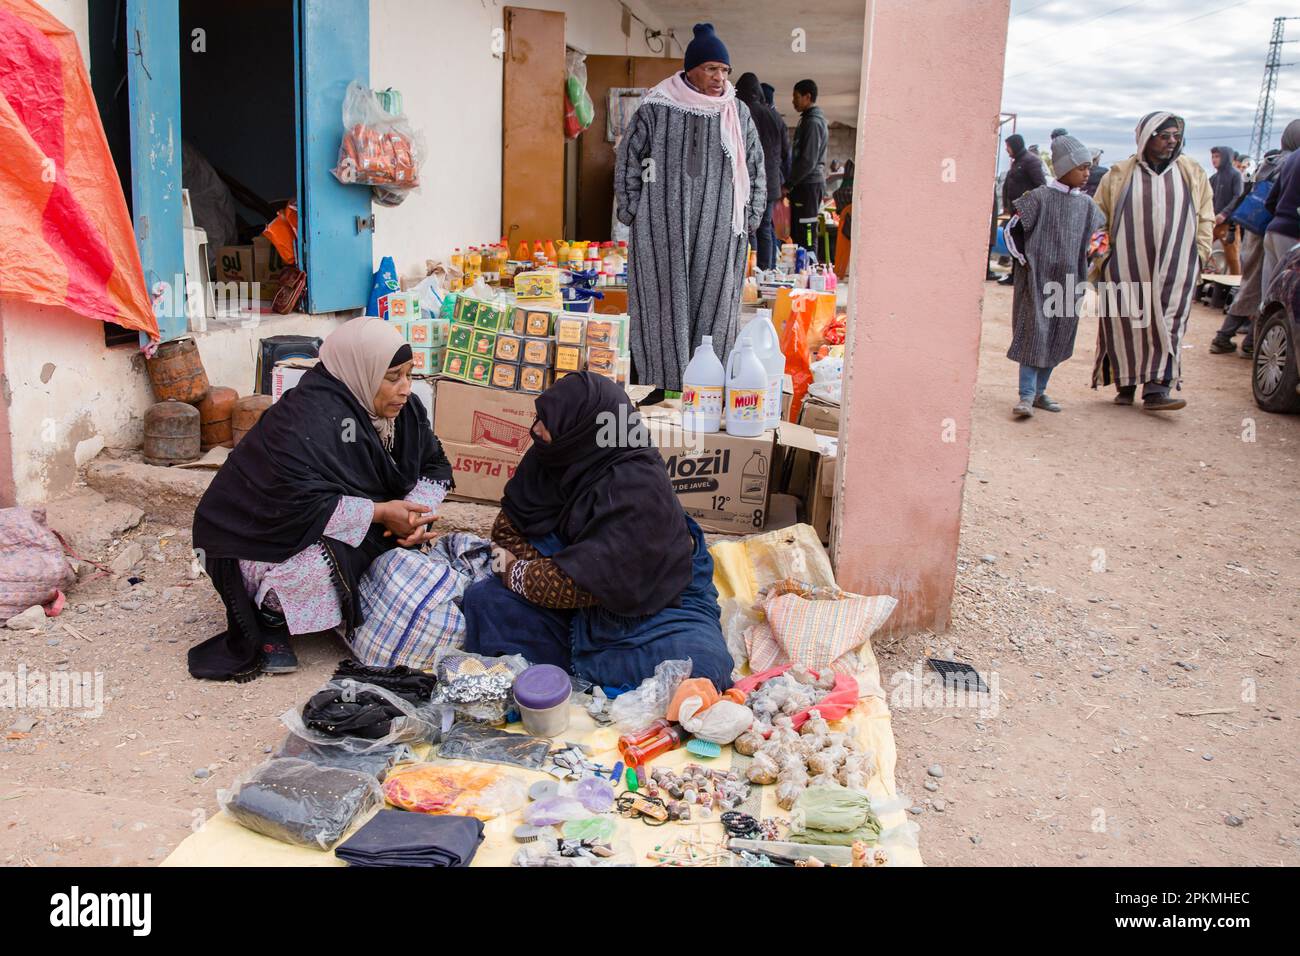 Local Moroccans stroll and sell food at a Berber market Stock Photo